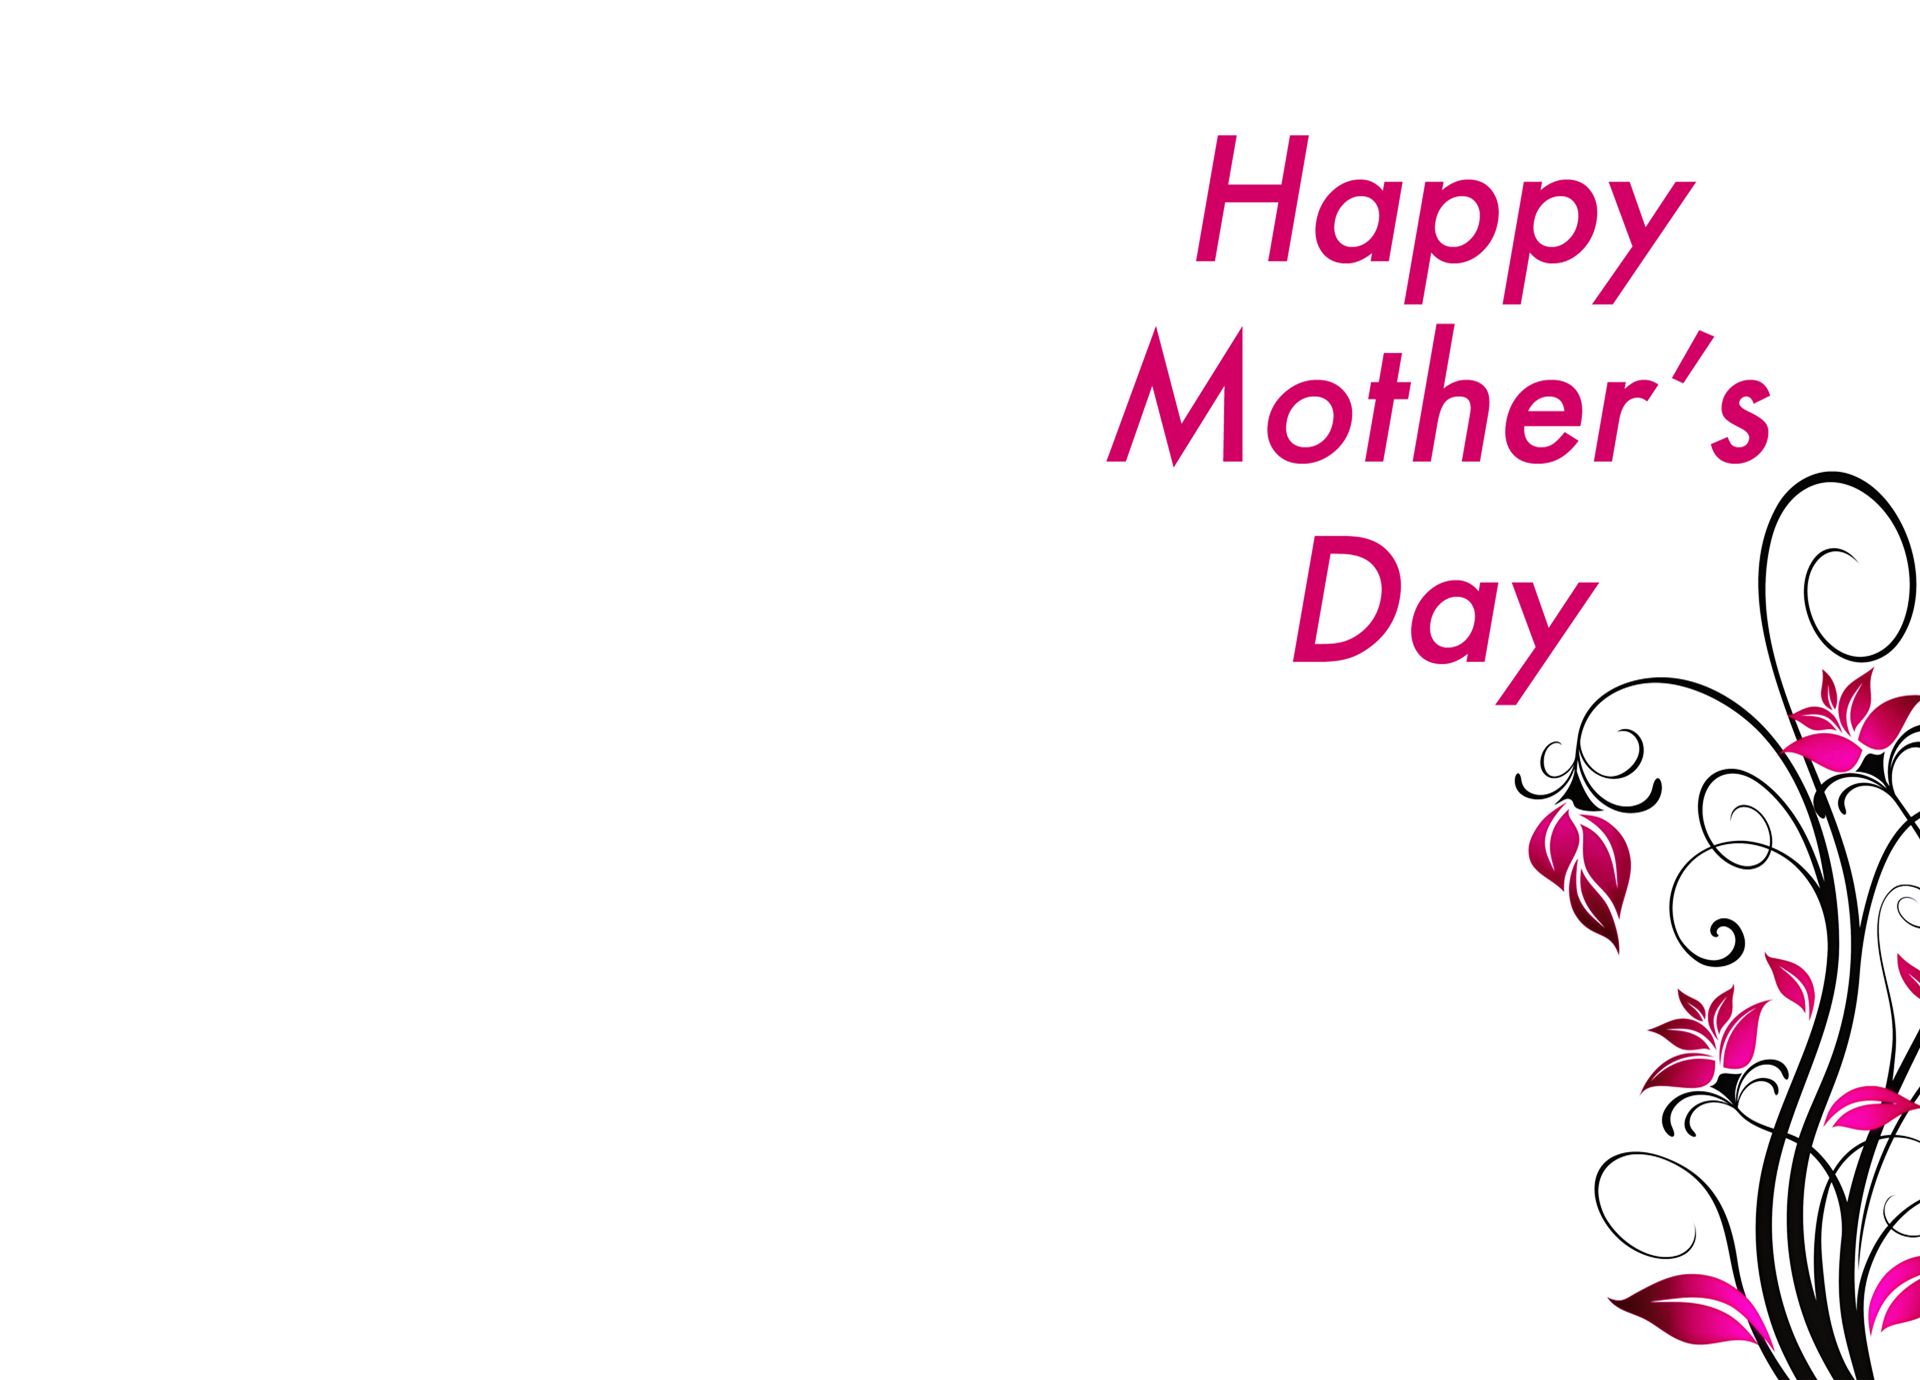 Mothers Day Cards Free Download | Wallpapers, Backgrounds, Images ...